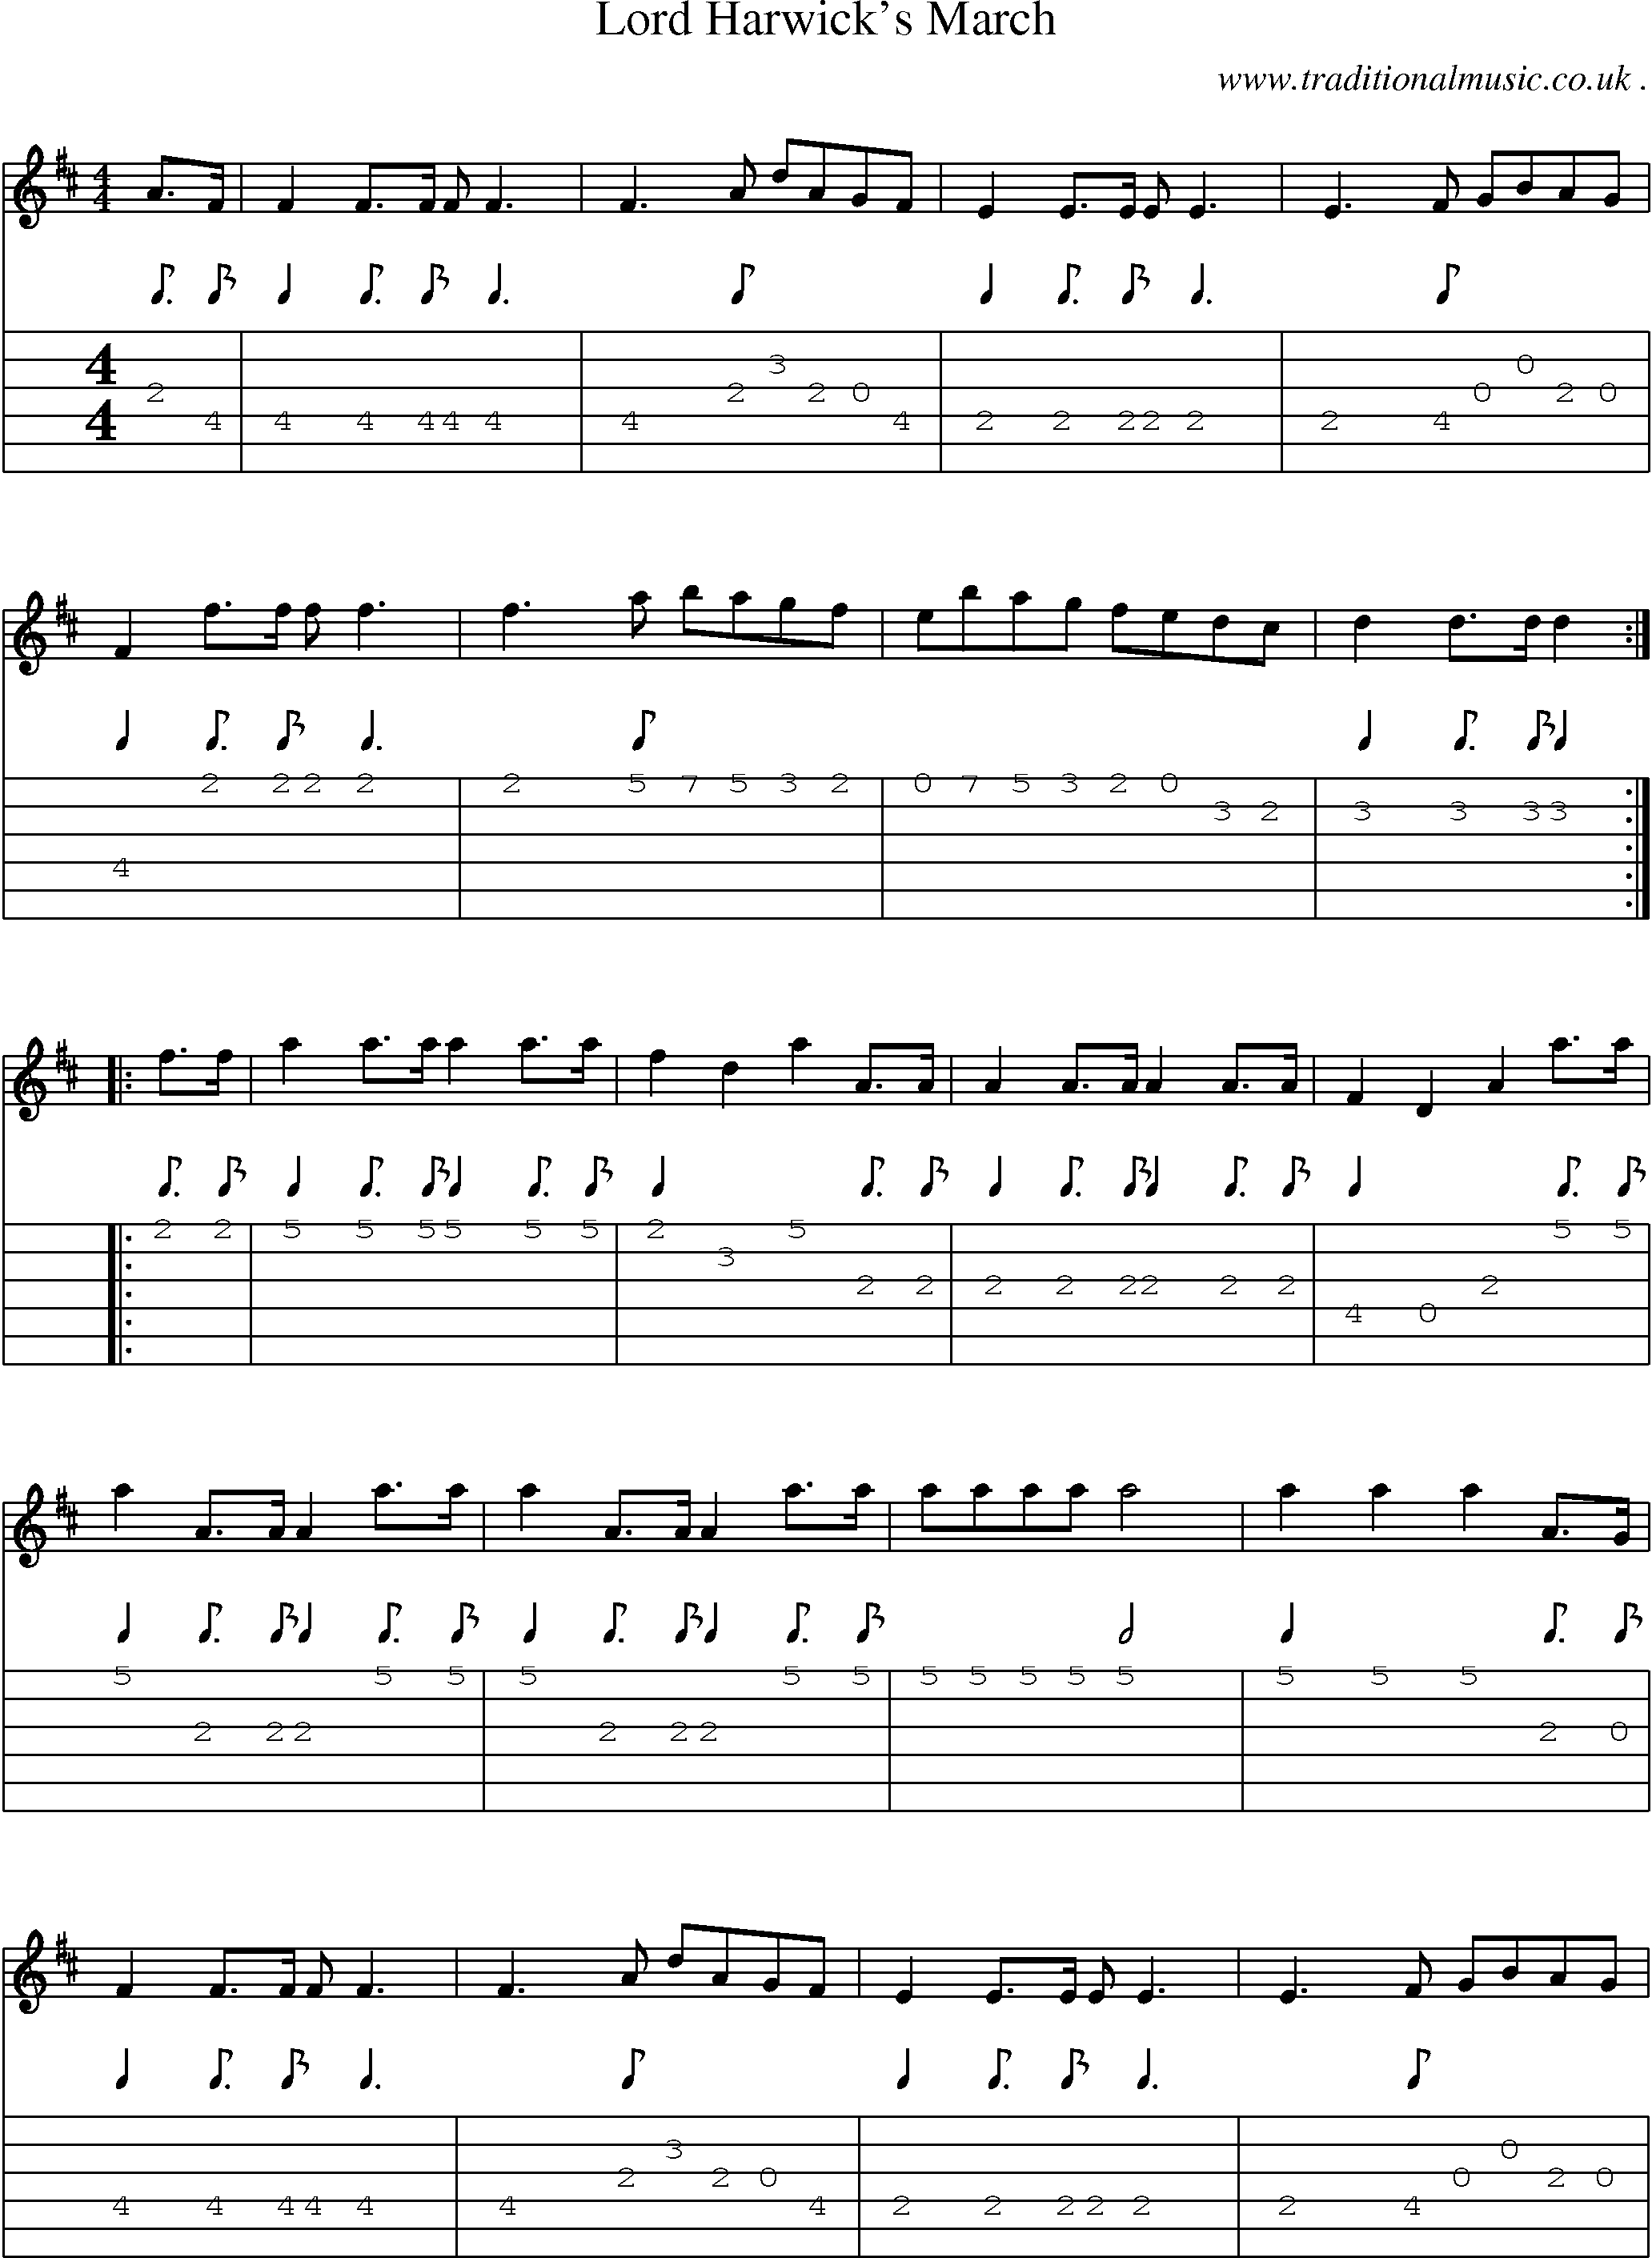 Sheet-Music and Guitar Tabs for Lord Harwicks March